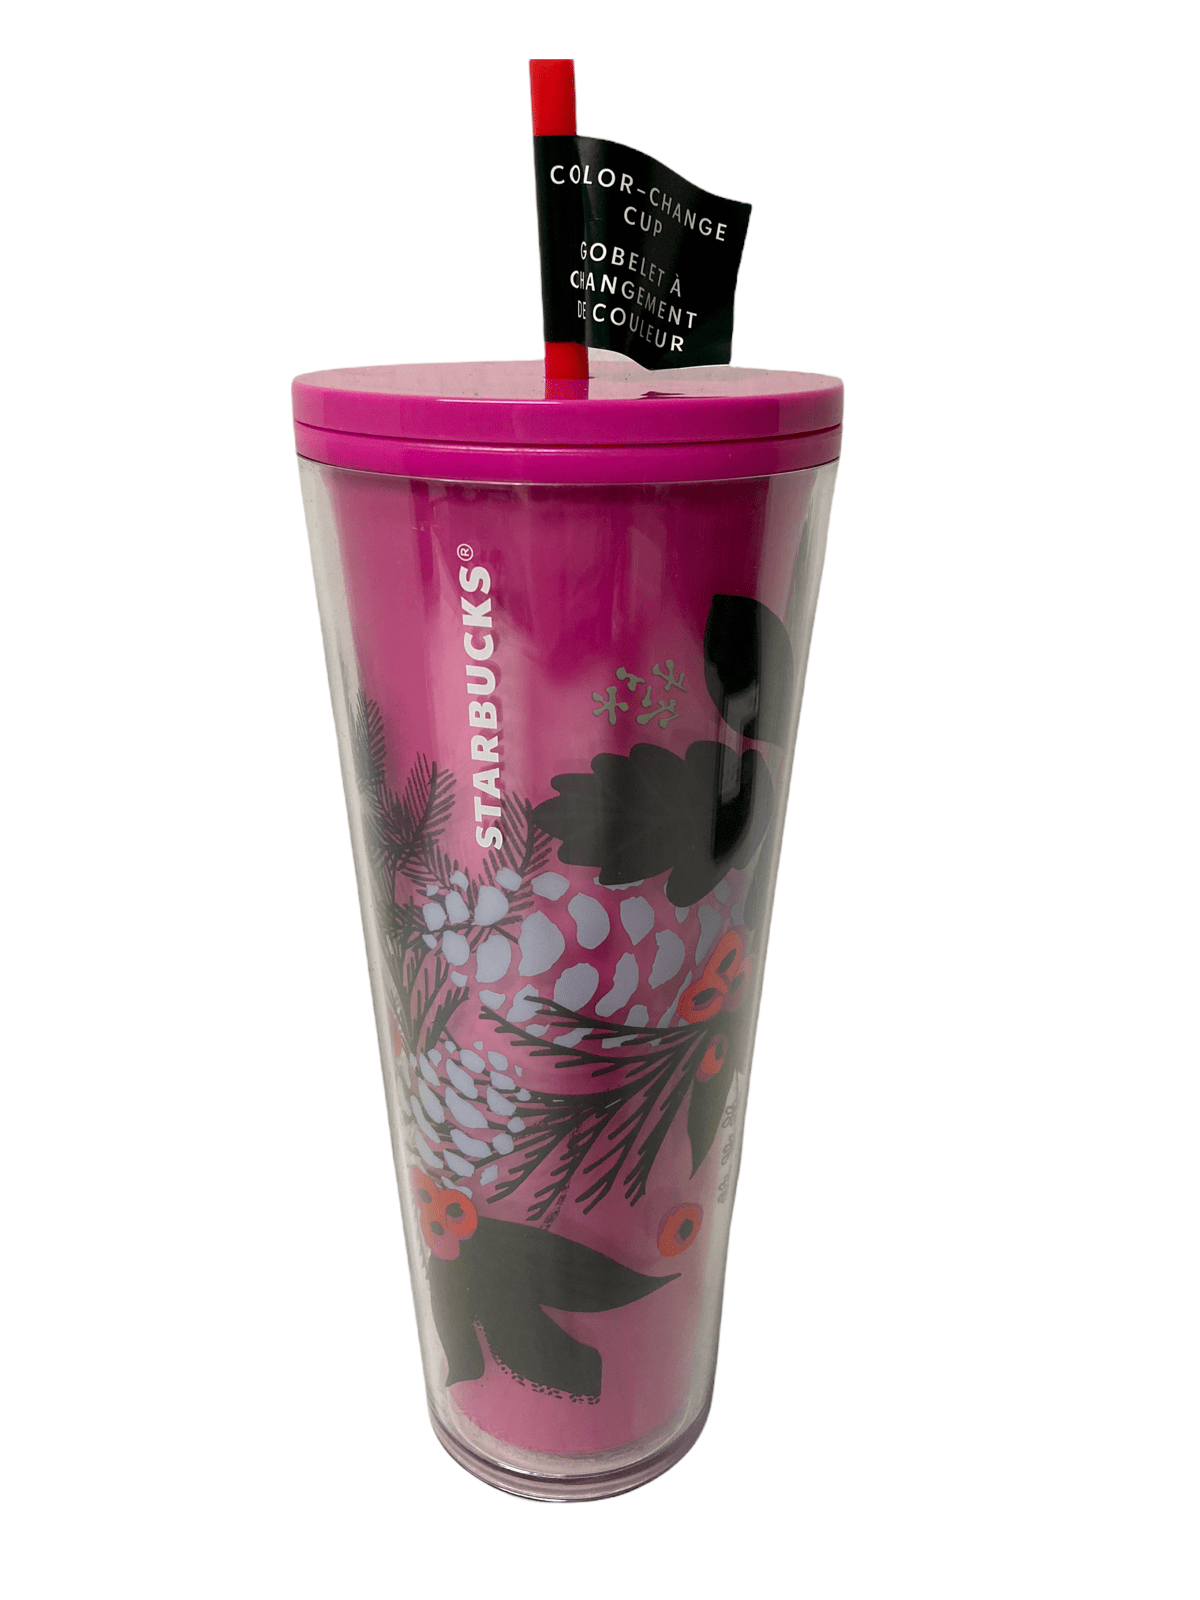 https://www.prairiegrit.com/wp-content/uploads/2021/11/starbucks-christmas-holiday-pink-poinsettia-venti-tumbler-color-changing.png